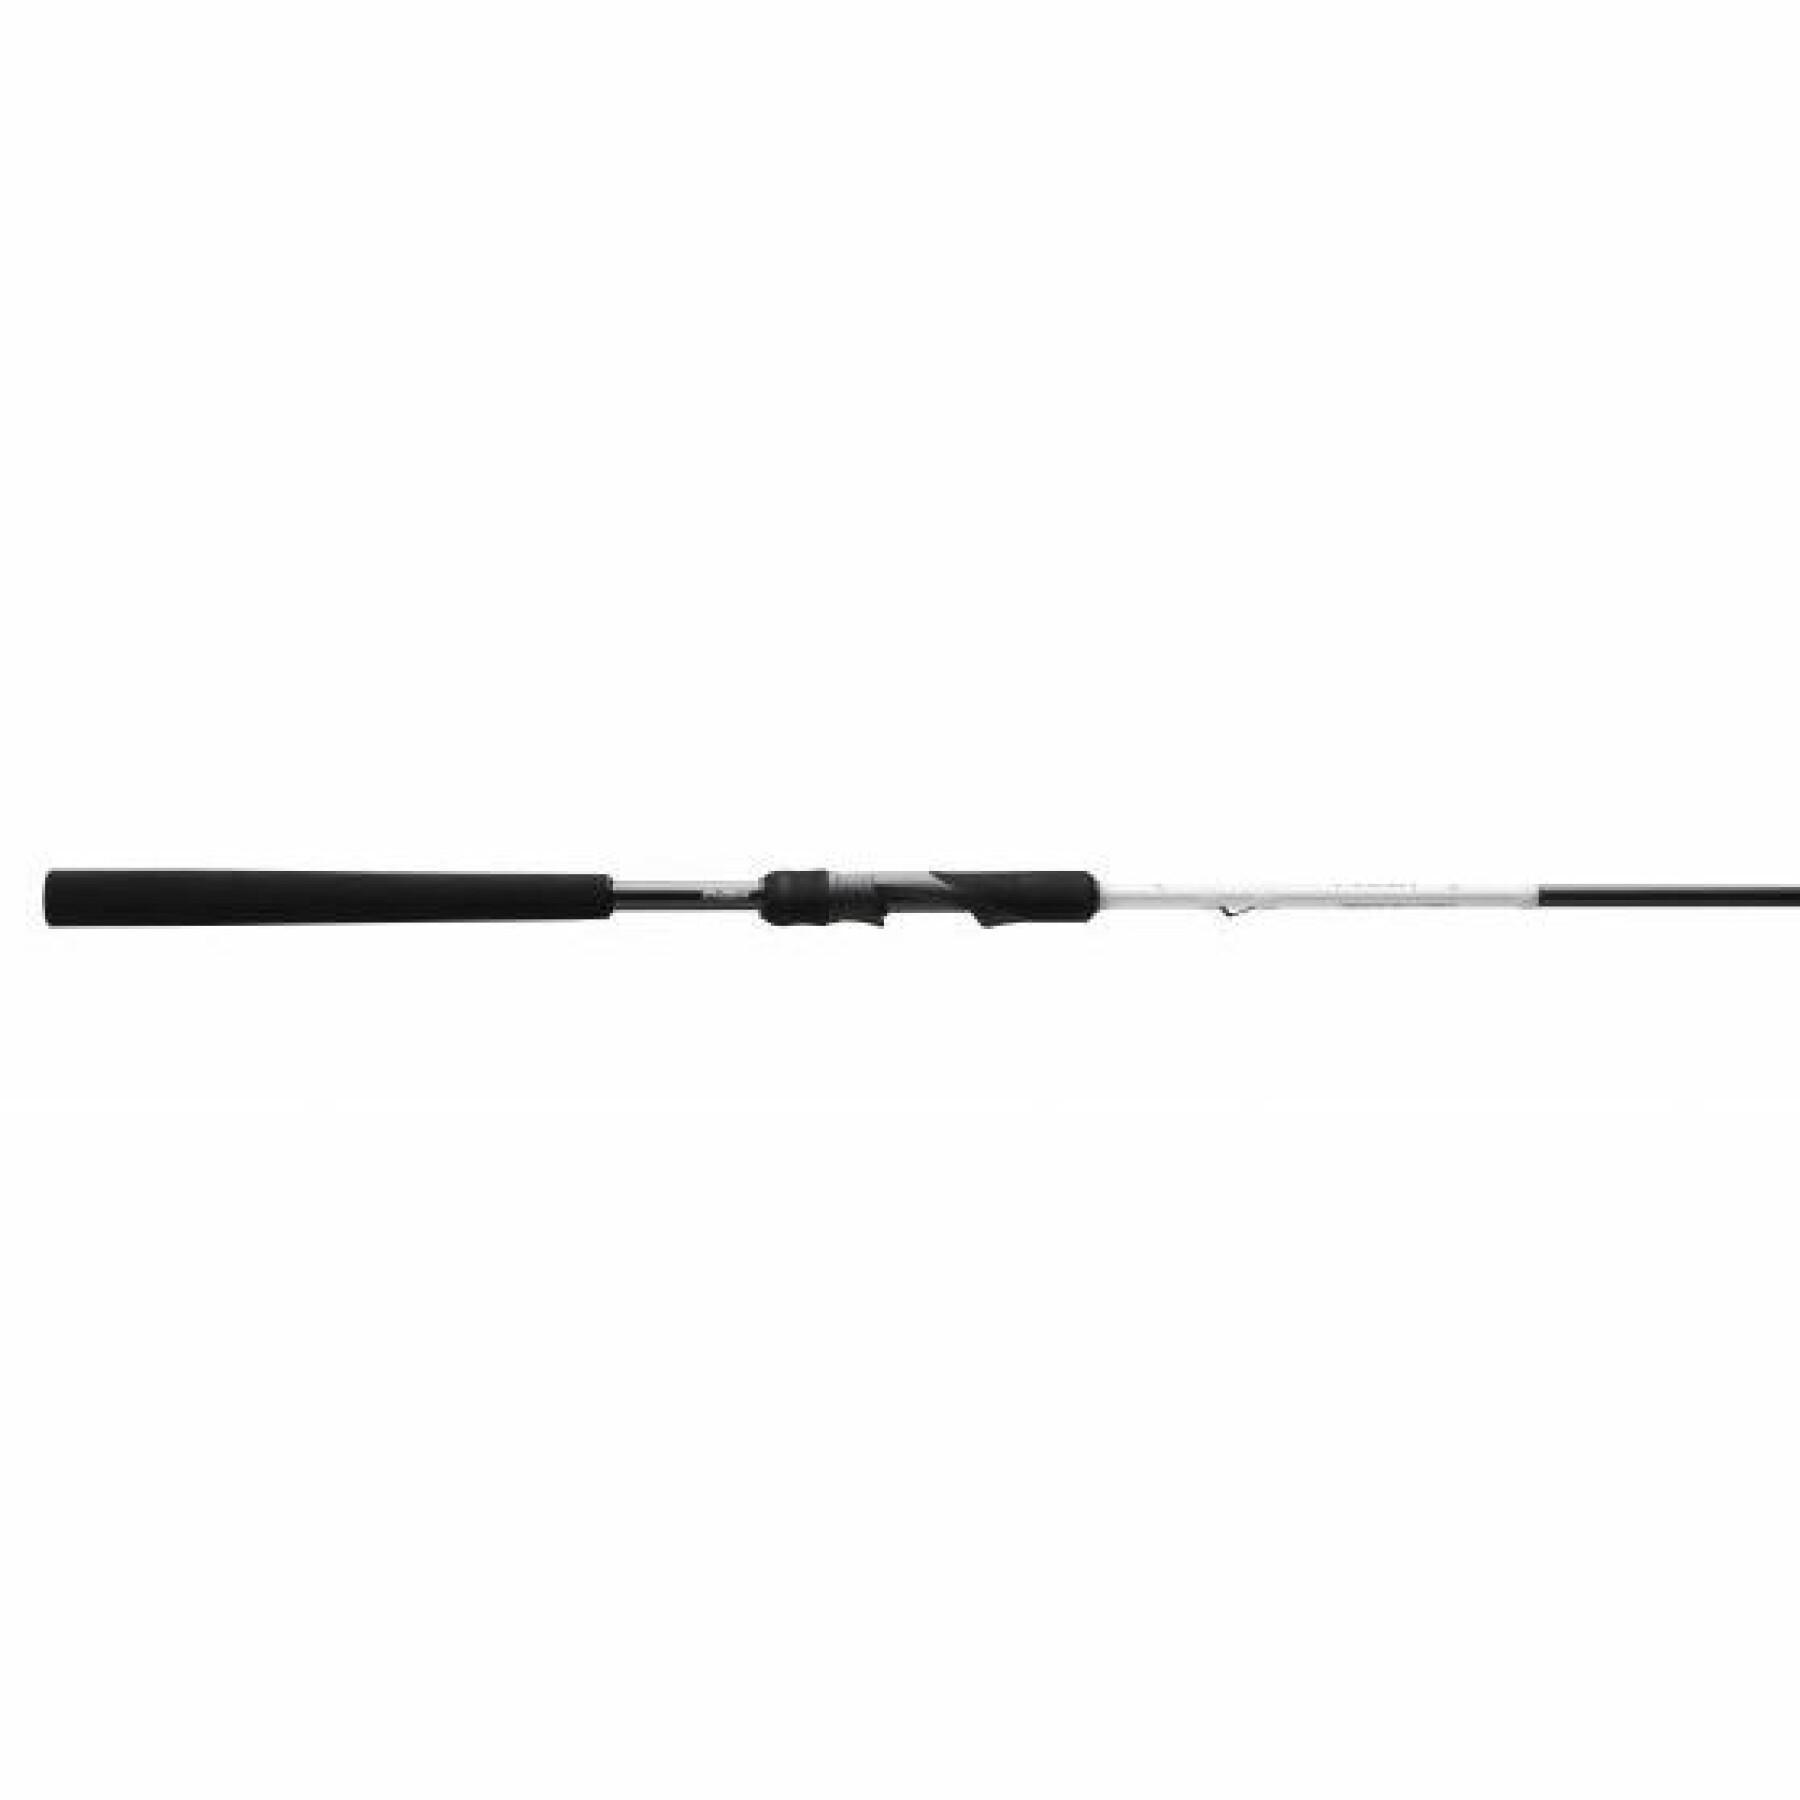 Cane 13 Fishing Rely S Spin 2,18m 20-80g